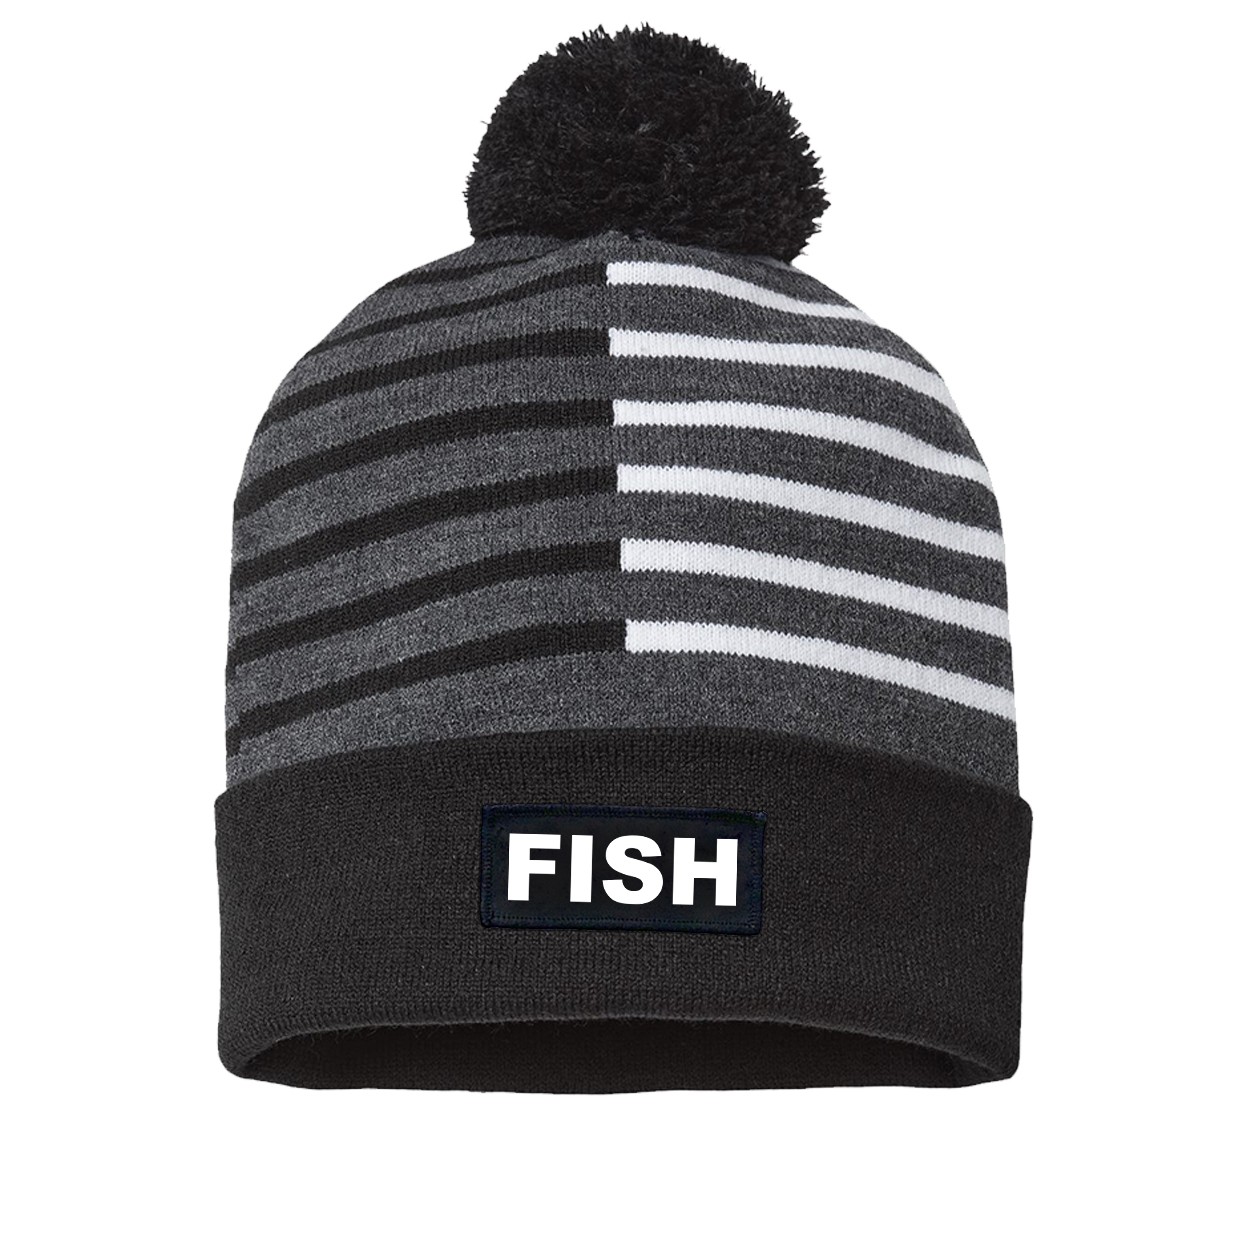 Fish Brand Logo Night Out Woven Patch Roll Up Pom Knit Beanie Half Color Black/White (White Logo)